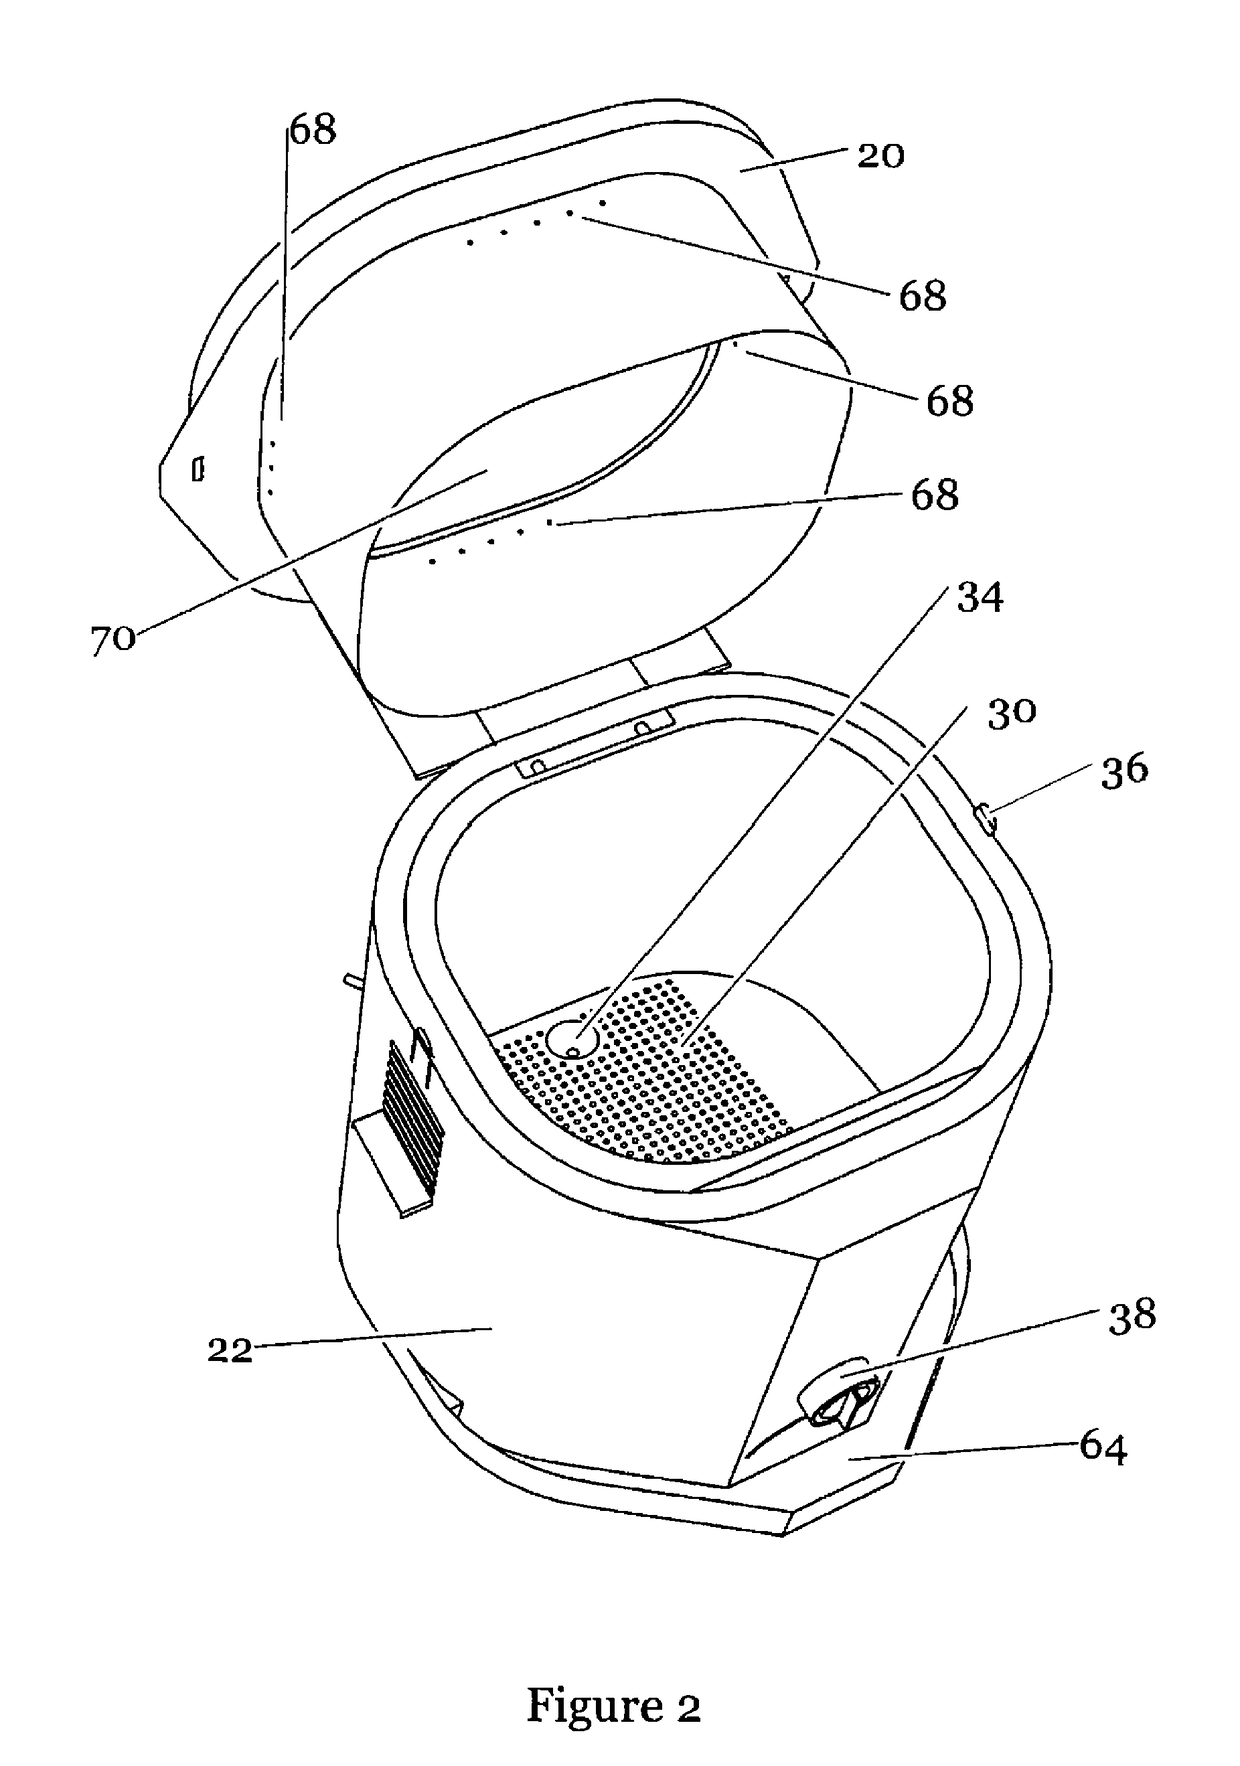 Device to efficiently cook foods using liquids and hot vapors